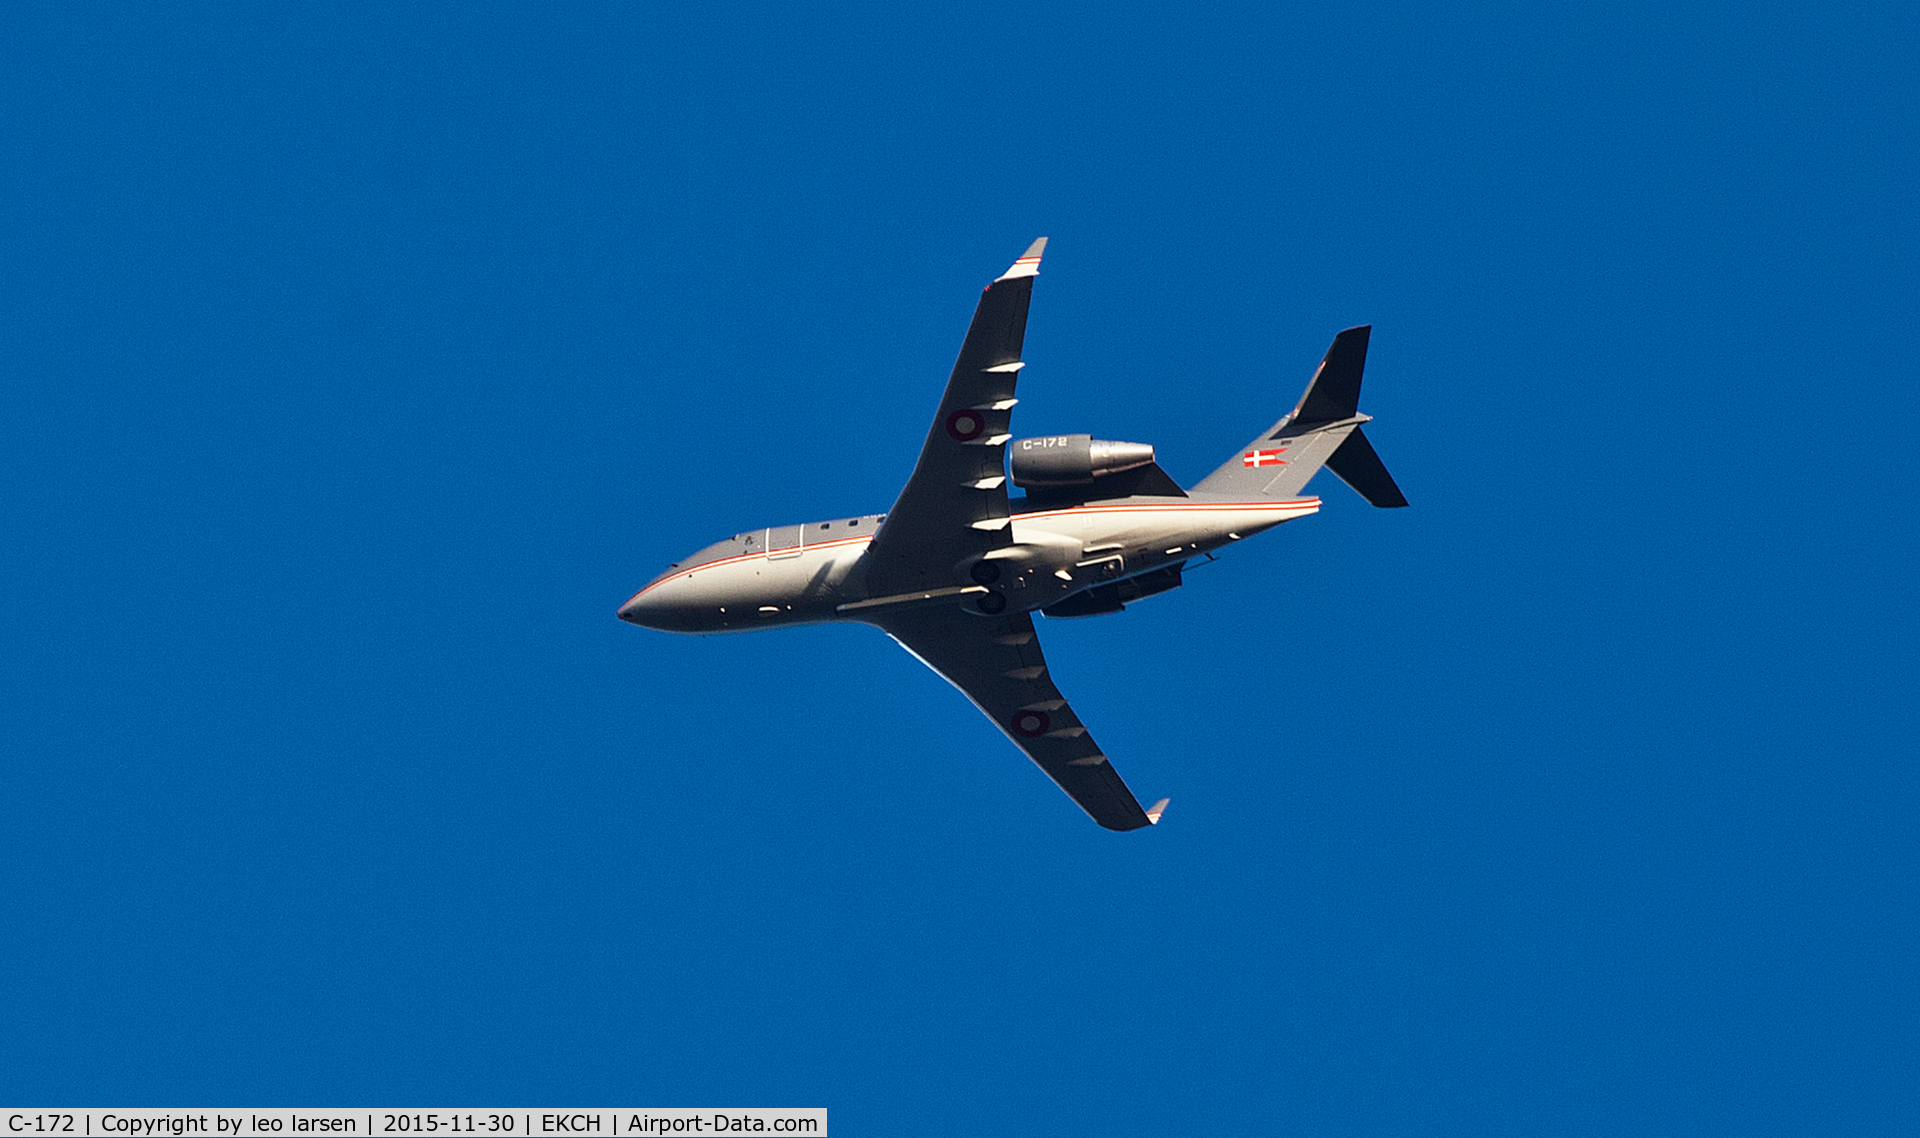 C-172, 2000 Bombardier Challenger 604 (CL-600-2B16) C/N 5472, Overflying CPH 30.11.15